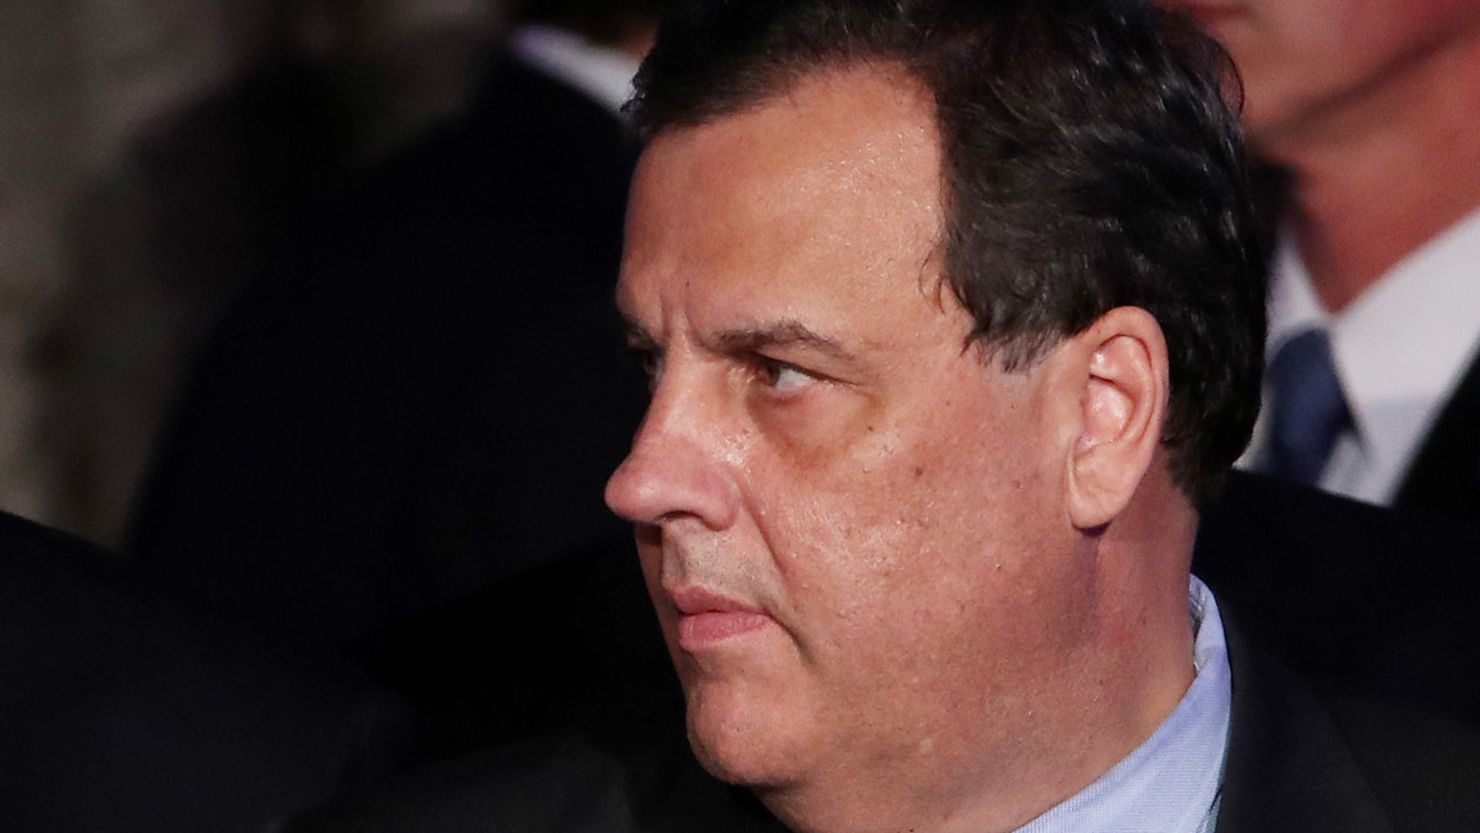 New Jersey Gov. Chris Christie has longed denied knowing about the lane closures.